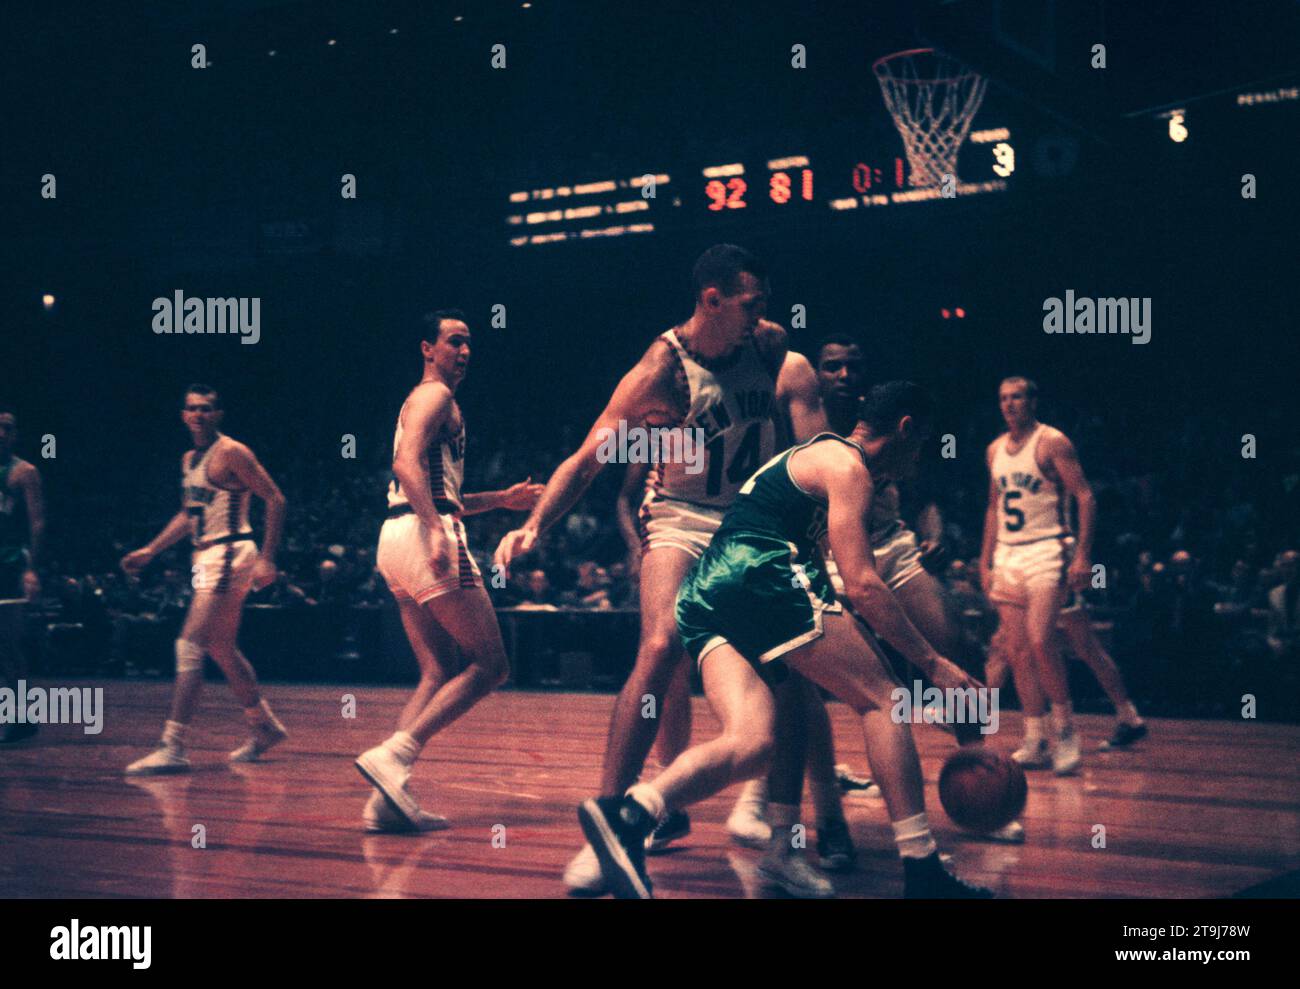 NEW YORK, NY - OCTOBER 25: Bill Sharman #21 of the Boston Celtics dribbles around Charlie Tyra #14 of the New York Knicks during an NBA game on October 25, 1958 at the Madison Square Garden in New York, New York.  (Photo by Hy Peskin) *** Local Caption *** Bill Sharman;Charlie Tyra Stock Photo